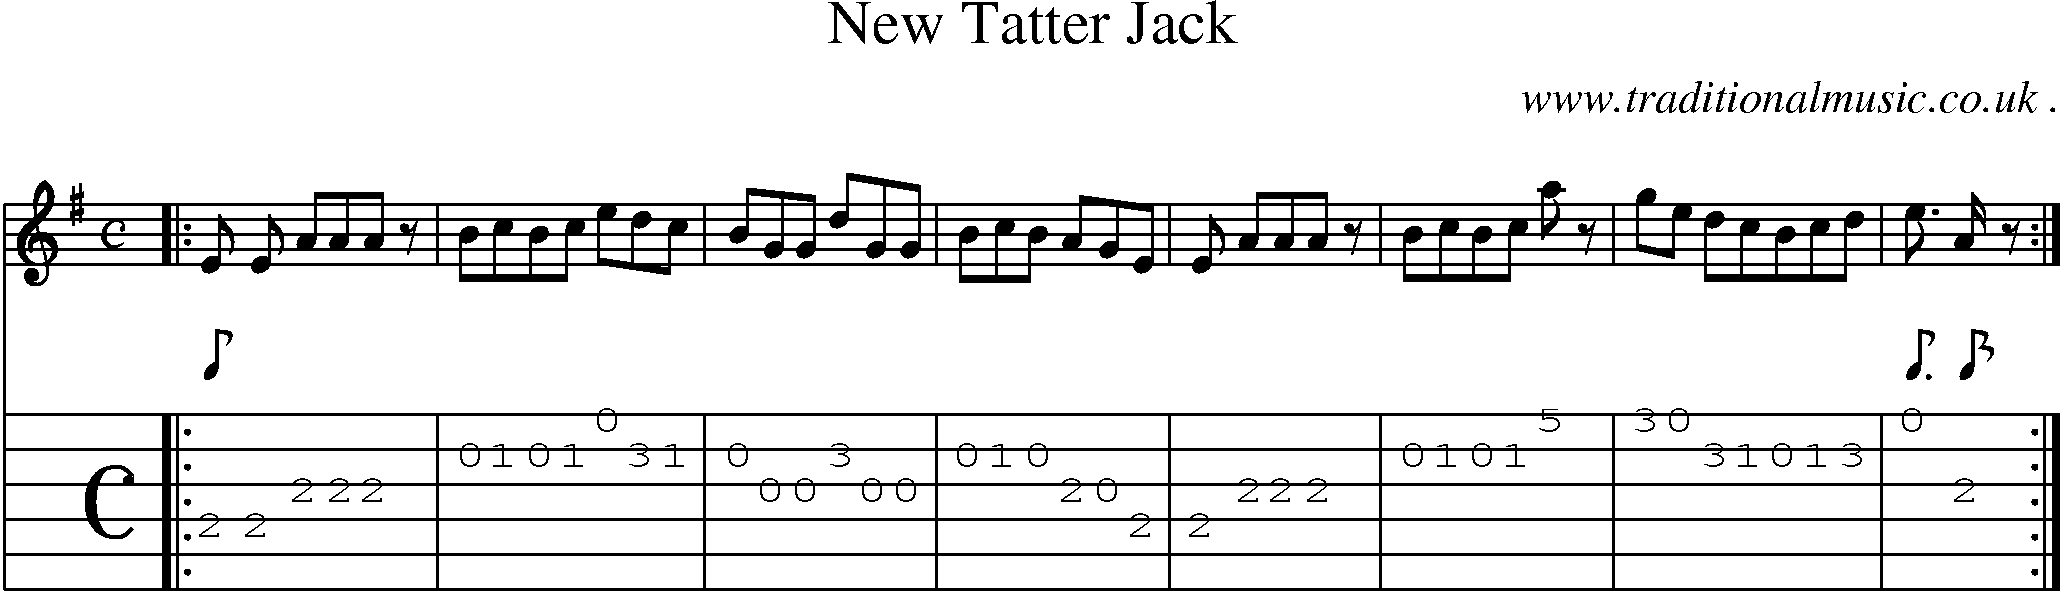 Sheet-Music and Guitar Tabs for New Tatter Jack